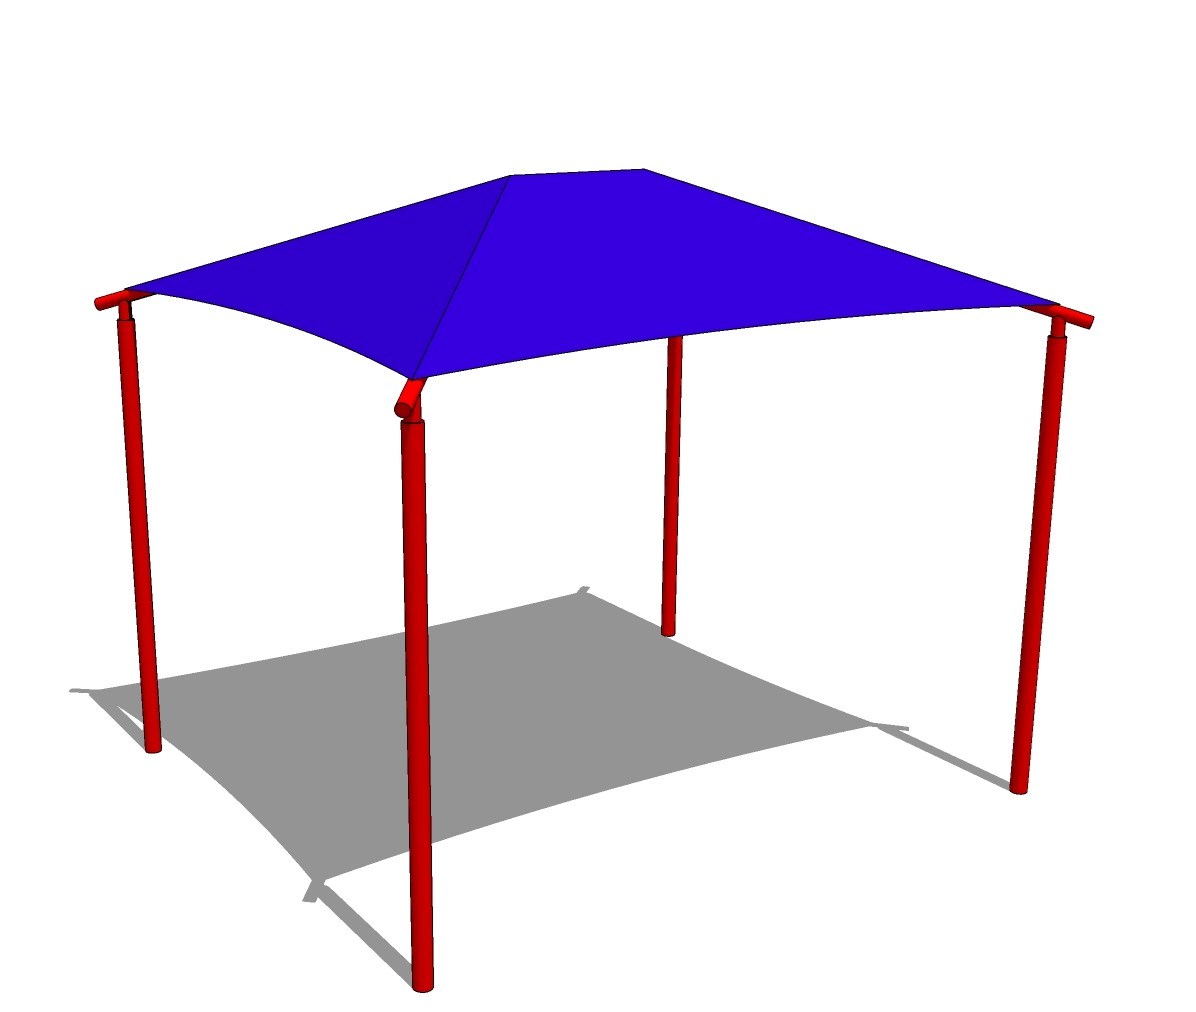 Fabric Structure: Standard Hip Rectangle